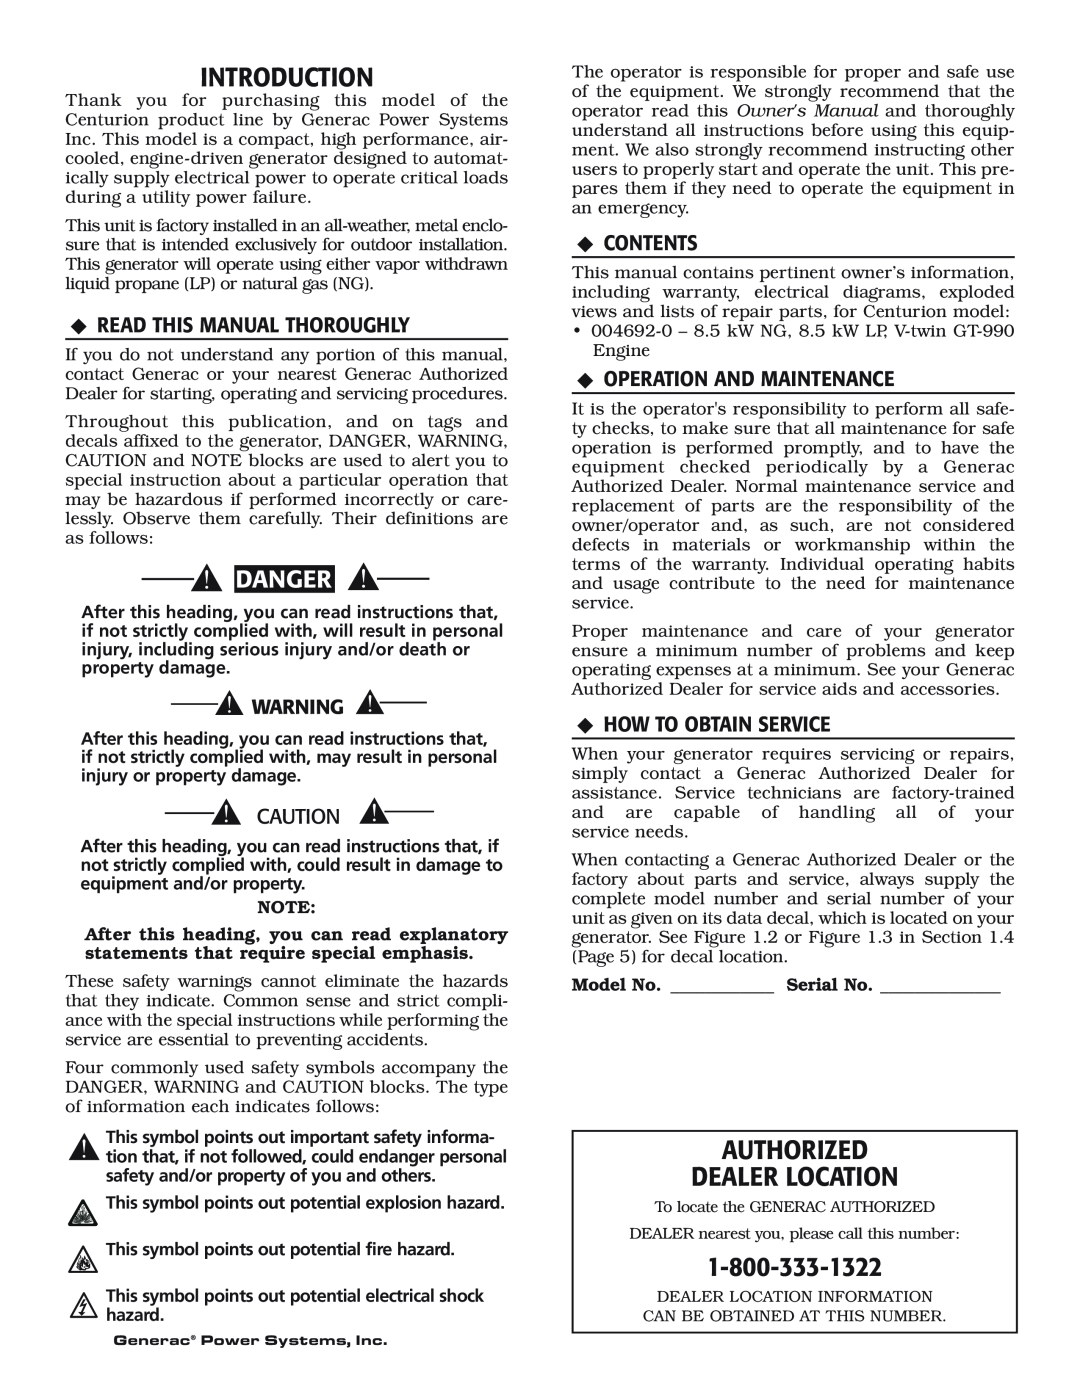 Generac 004692-0 Introduction, Authorized Dealer Location, 1-800-333-1322, Danger, Read This Manual Thoroughly, Contents 